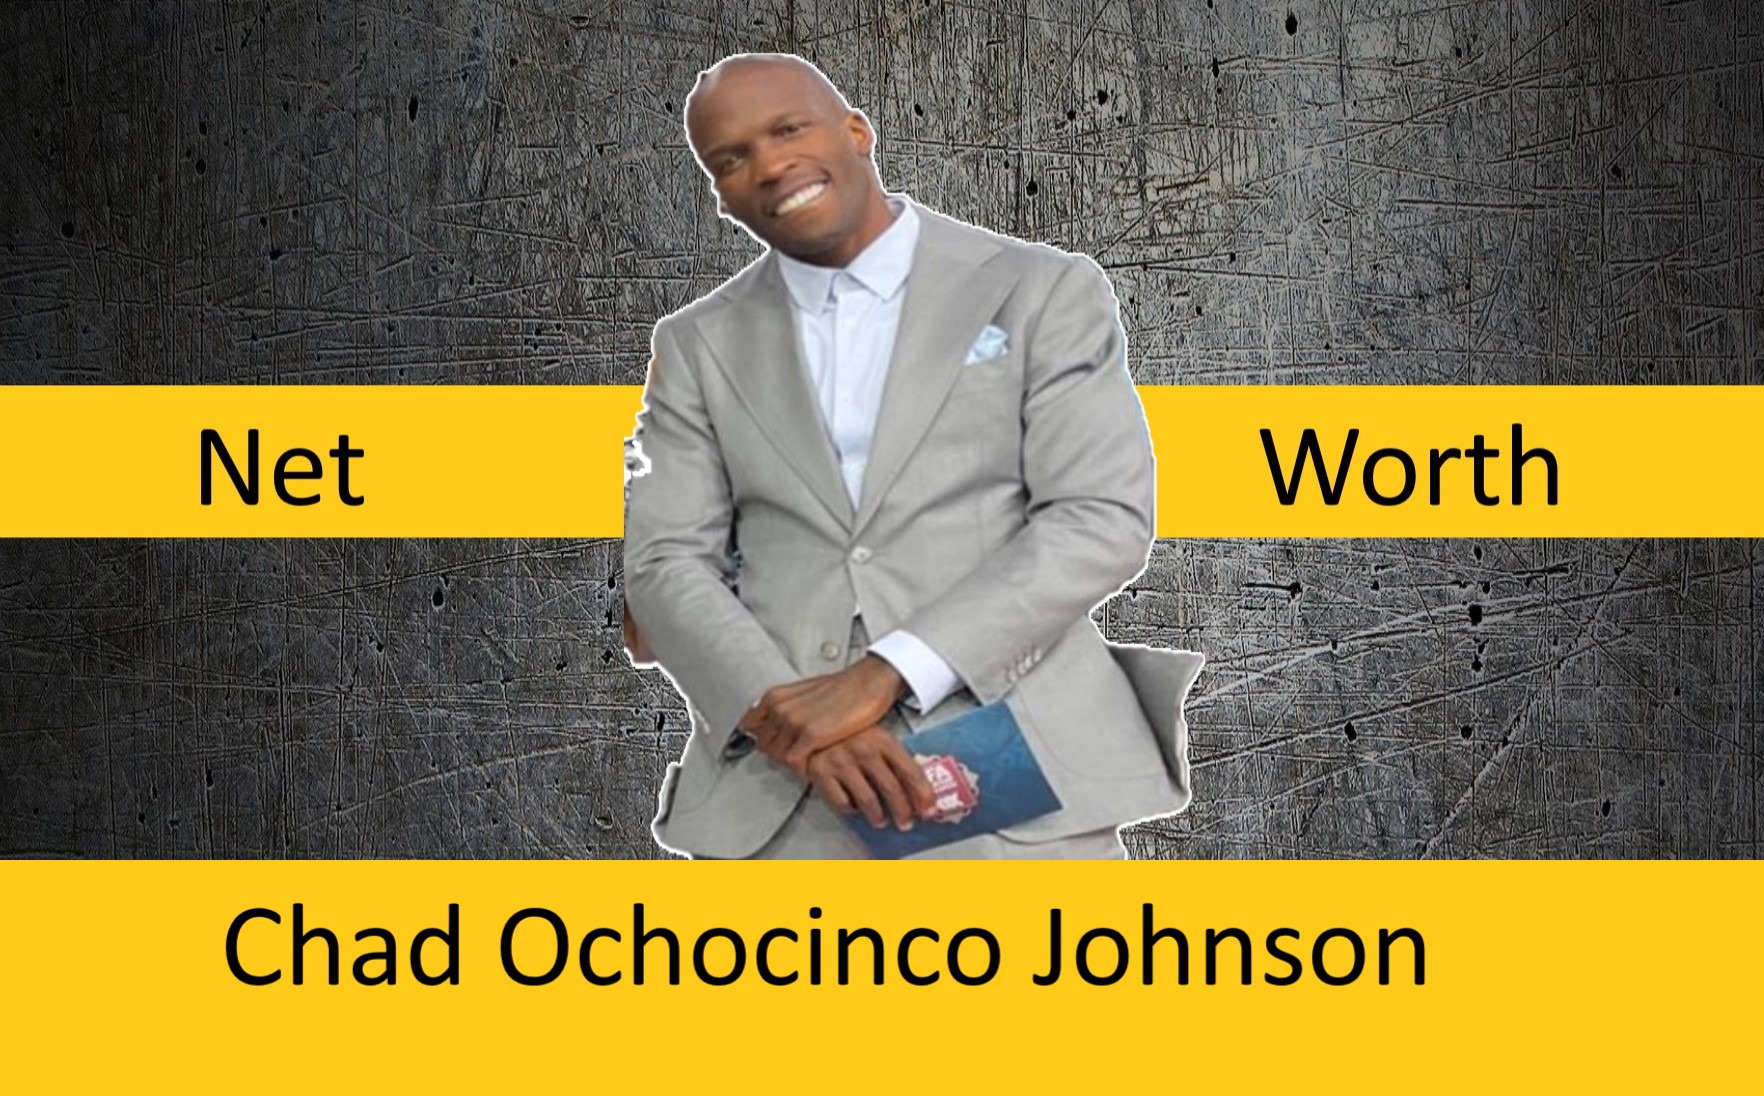 Chad Ochocinco Johnson Net Worth, Personal life and more getminute